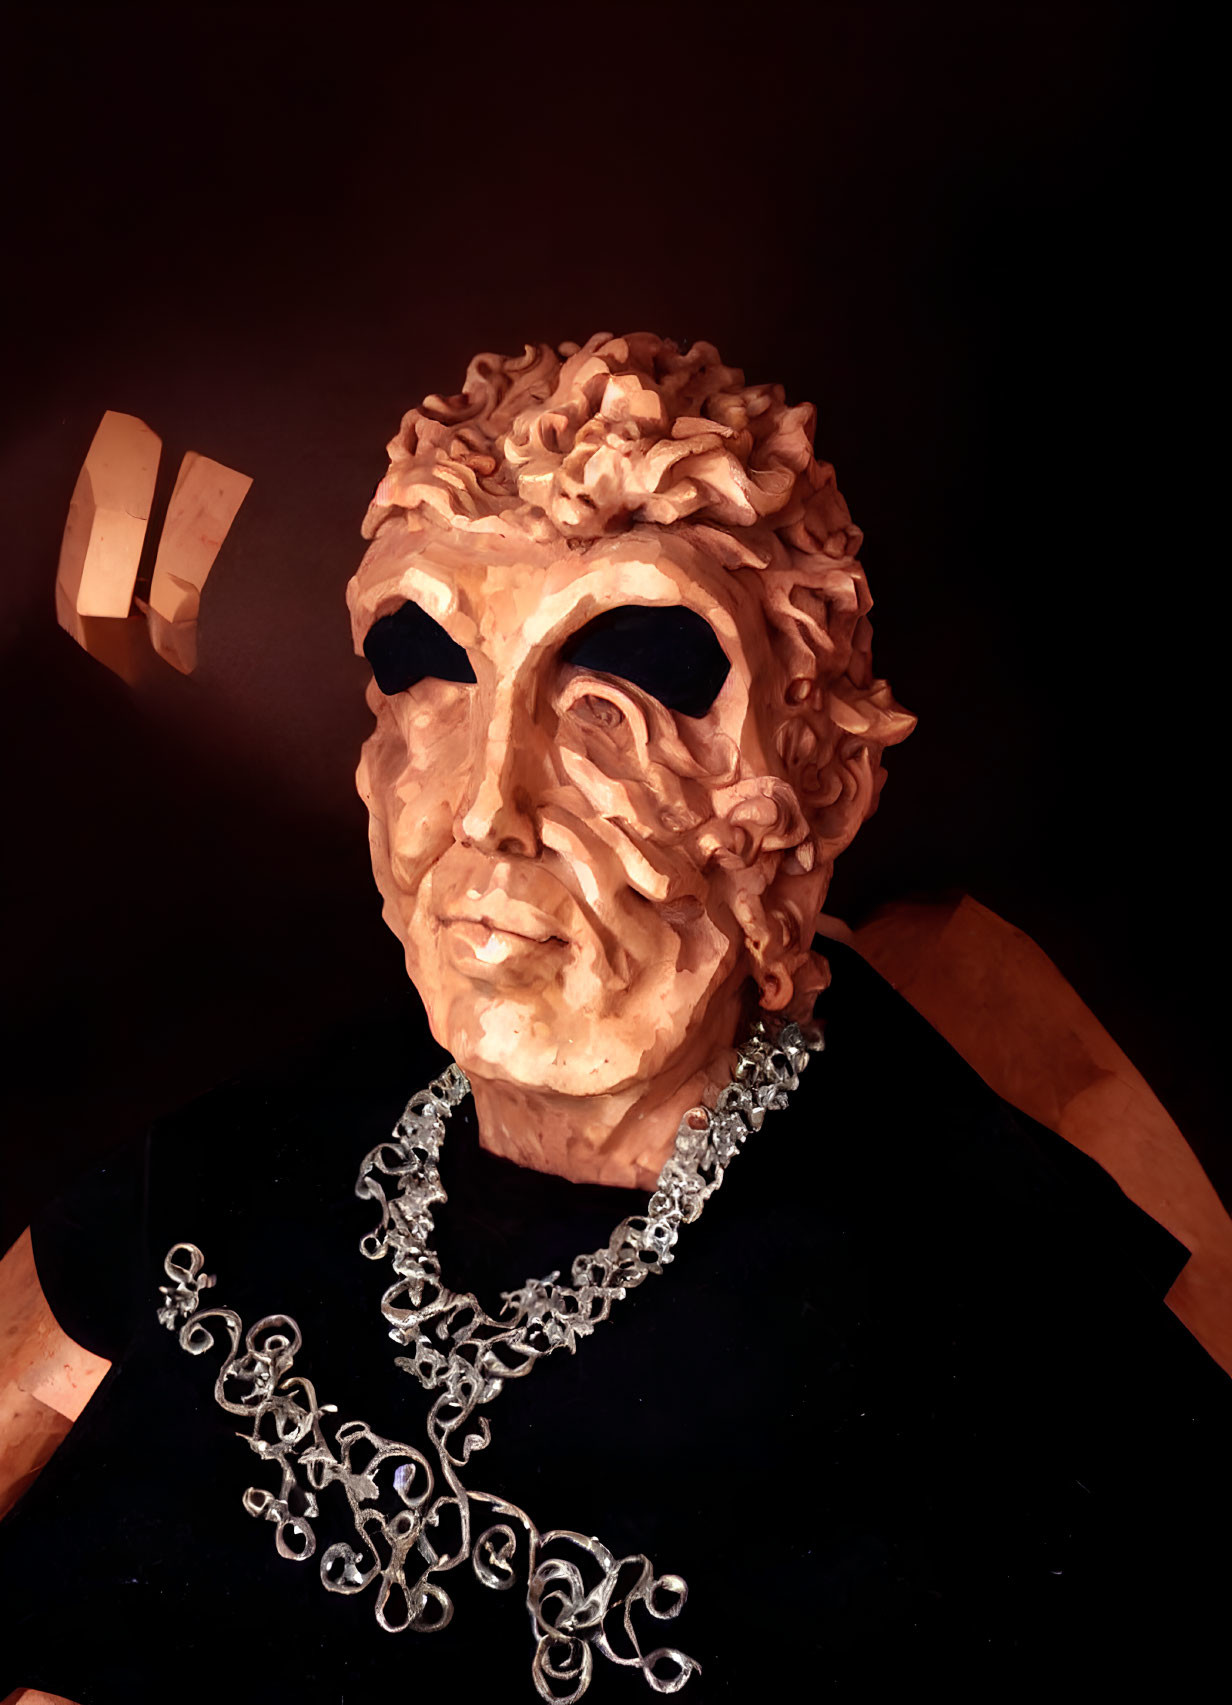 Curly-Haired Figure in Mask with Chain Necklace on Dark Background